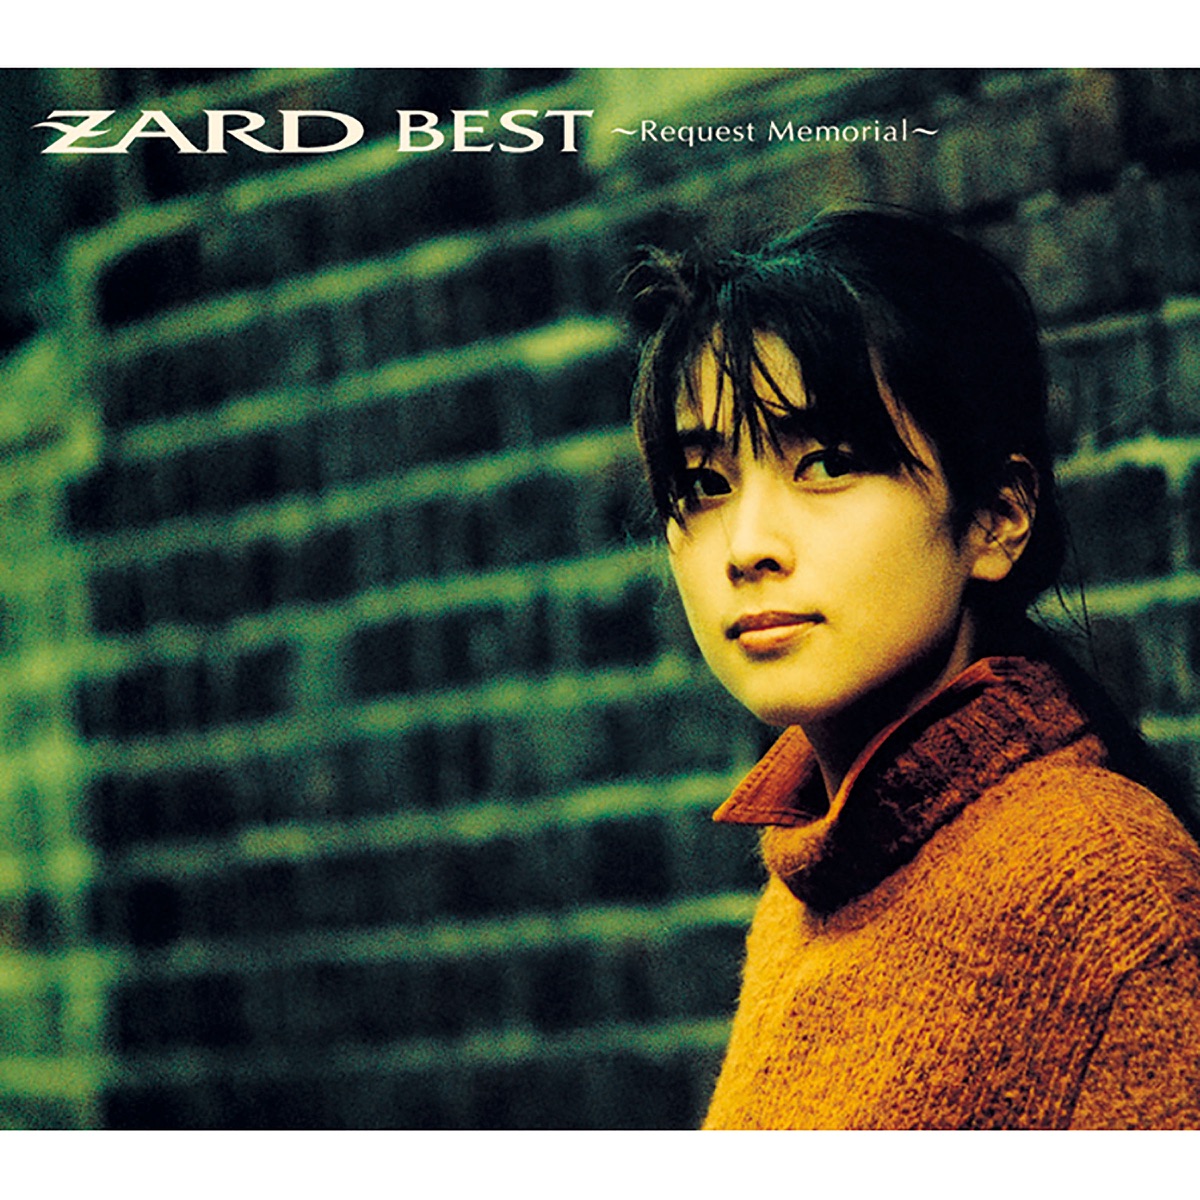 TODAY IS ANOTHER DAY - Album by ZARD - Apple Music